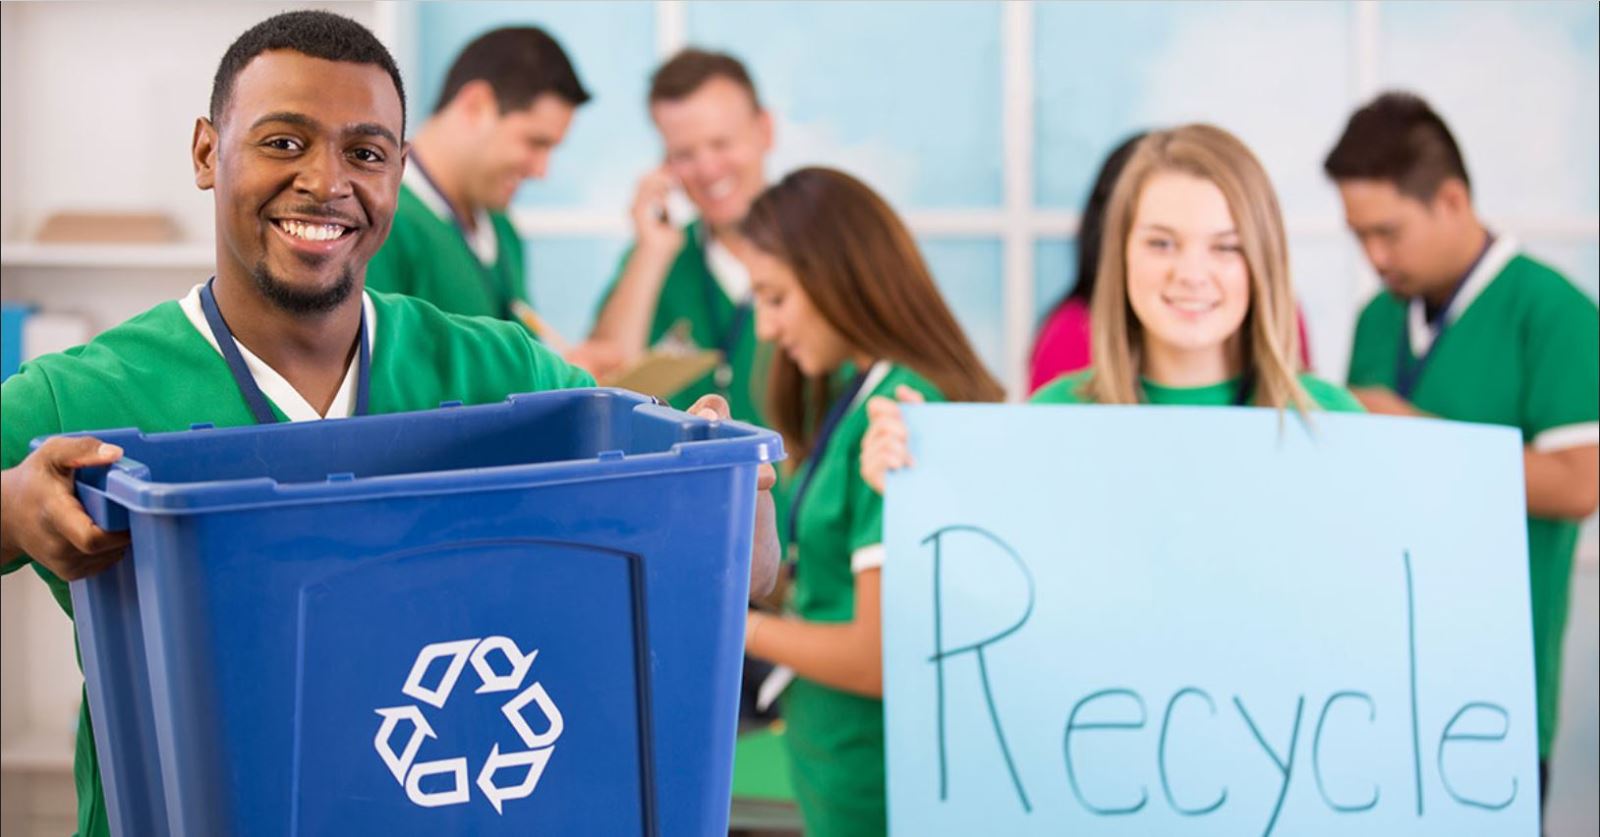 /DEP/trash-recycling/reduce-reuse-recycle-right.html